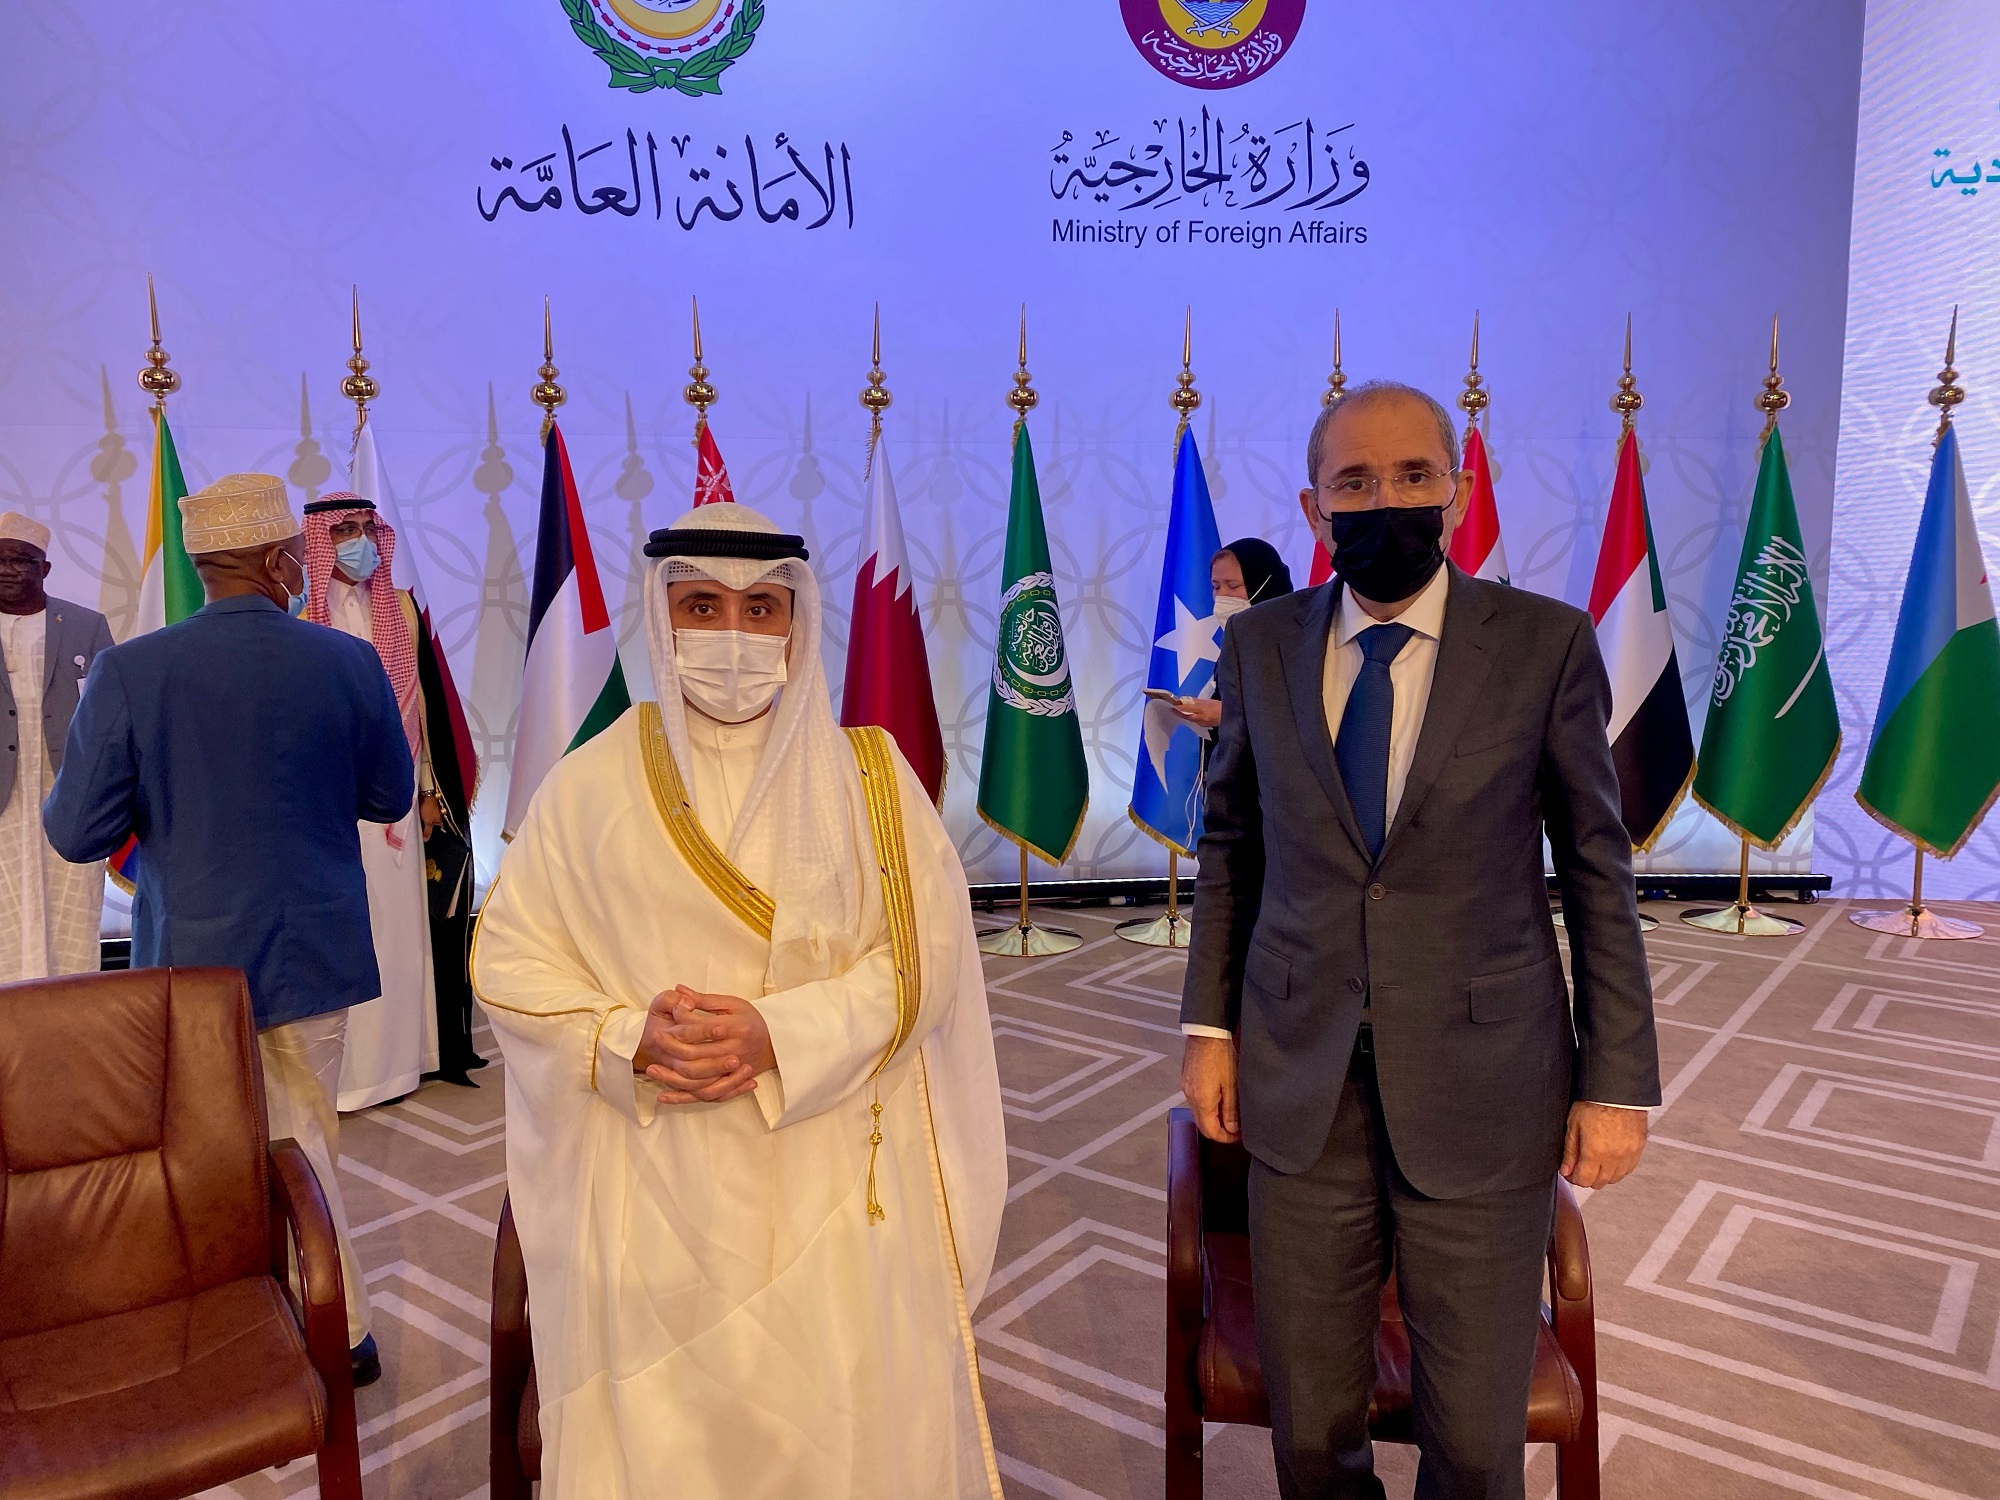 Kuwaiti Foreign Minister with his Jordanian counterpart